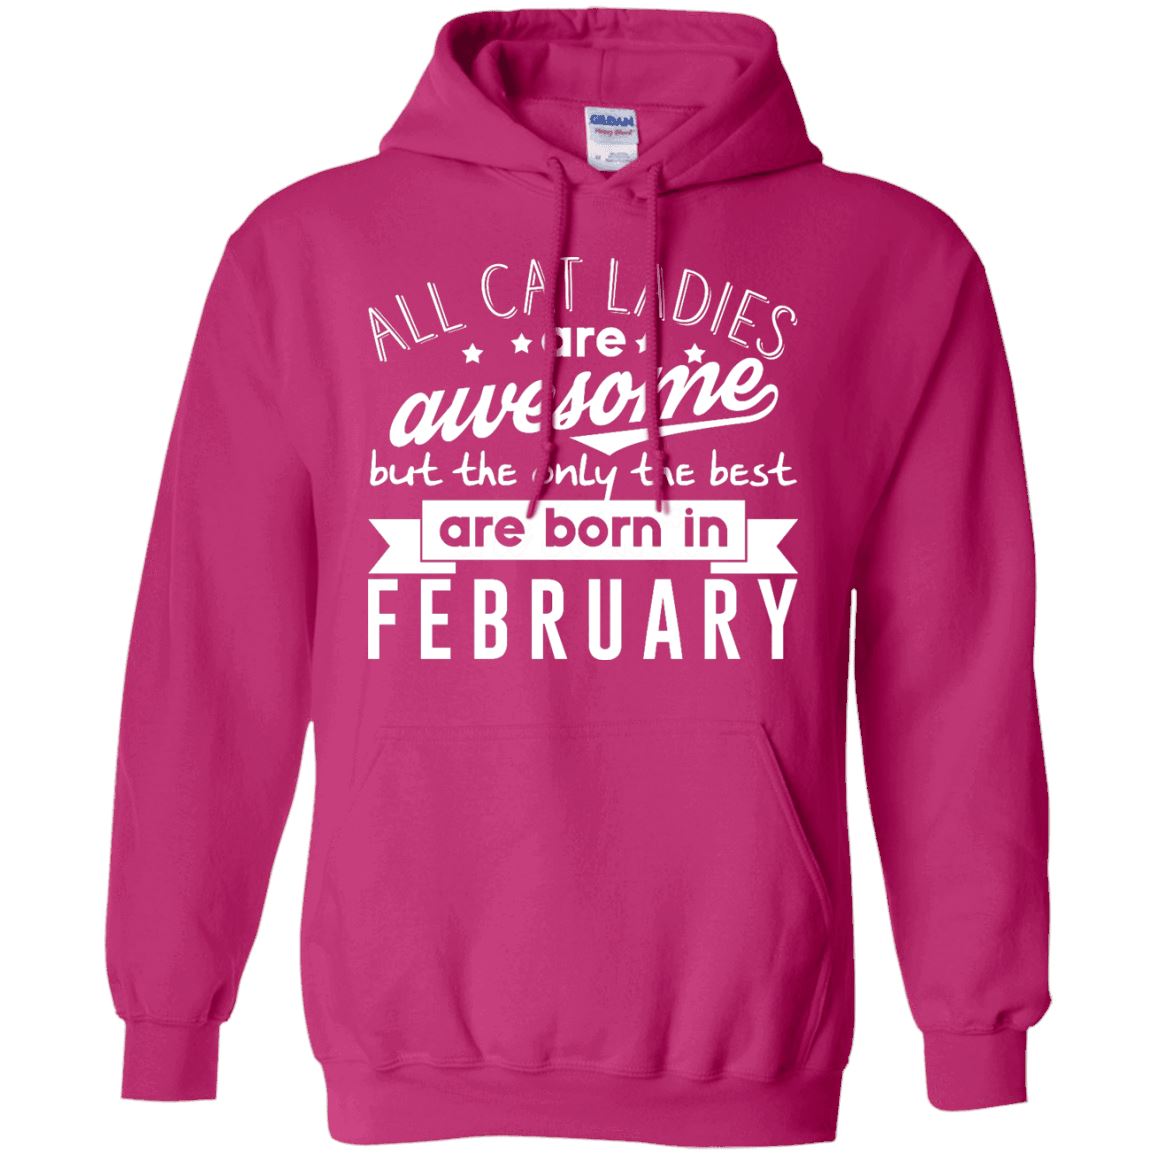 Cat Tee - All Cat Ladies Are Awesome - February - CatsForLife